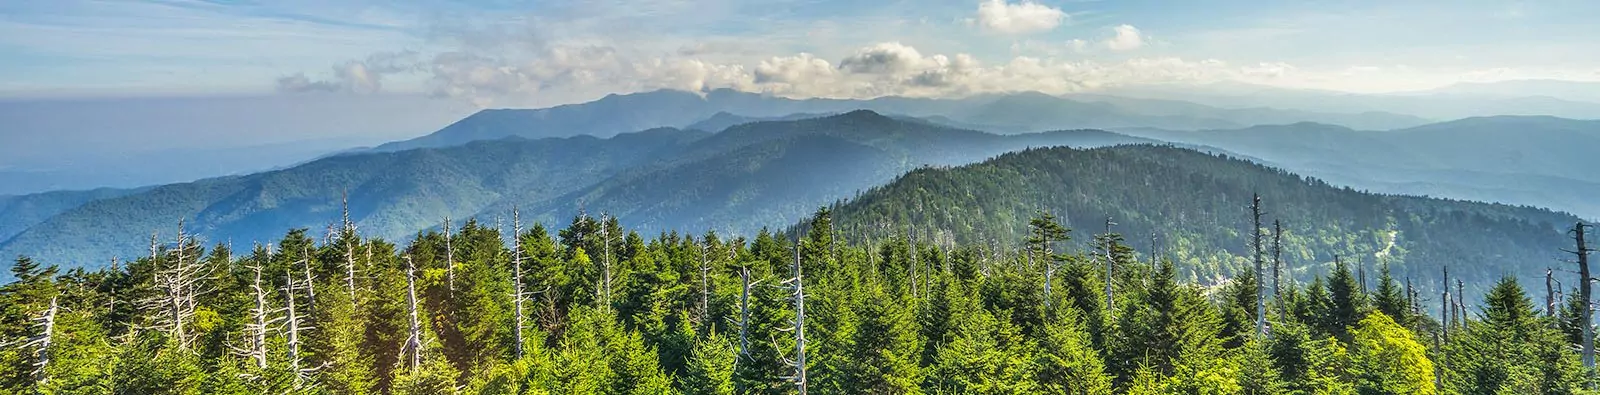 Detailed shot of part of the Smoky Mountains in Tennessee. This shot was taken from top Clingman's Dome